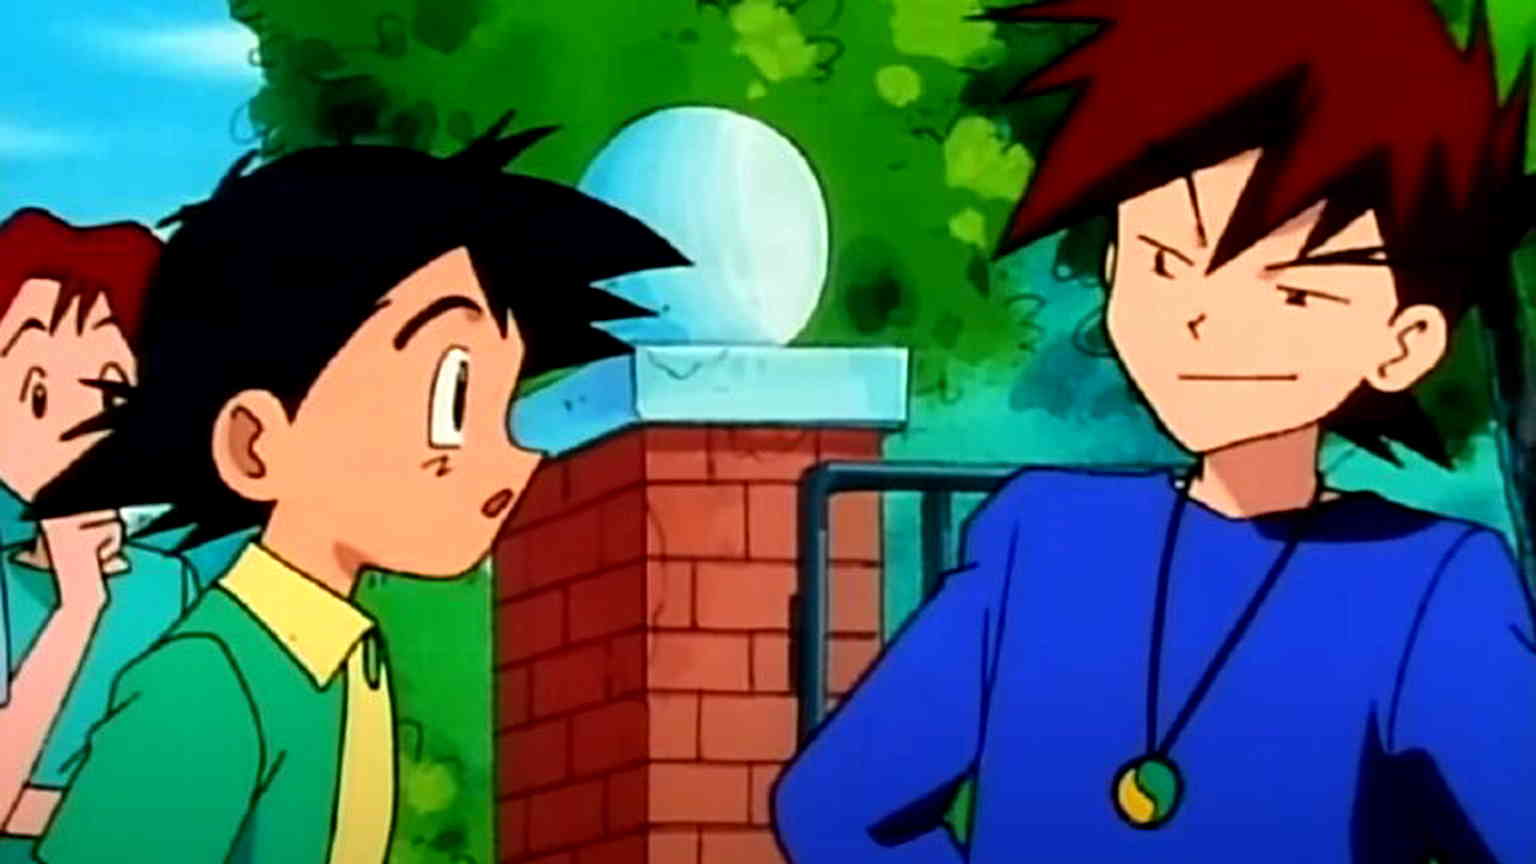 ‘Pokémon’ final episode will see return of Ash’s original rival from pilot